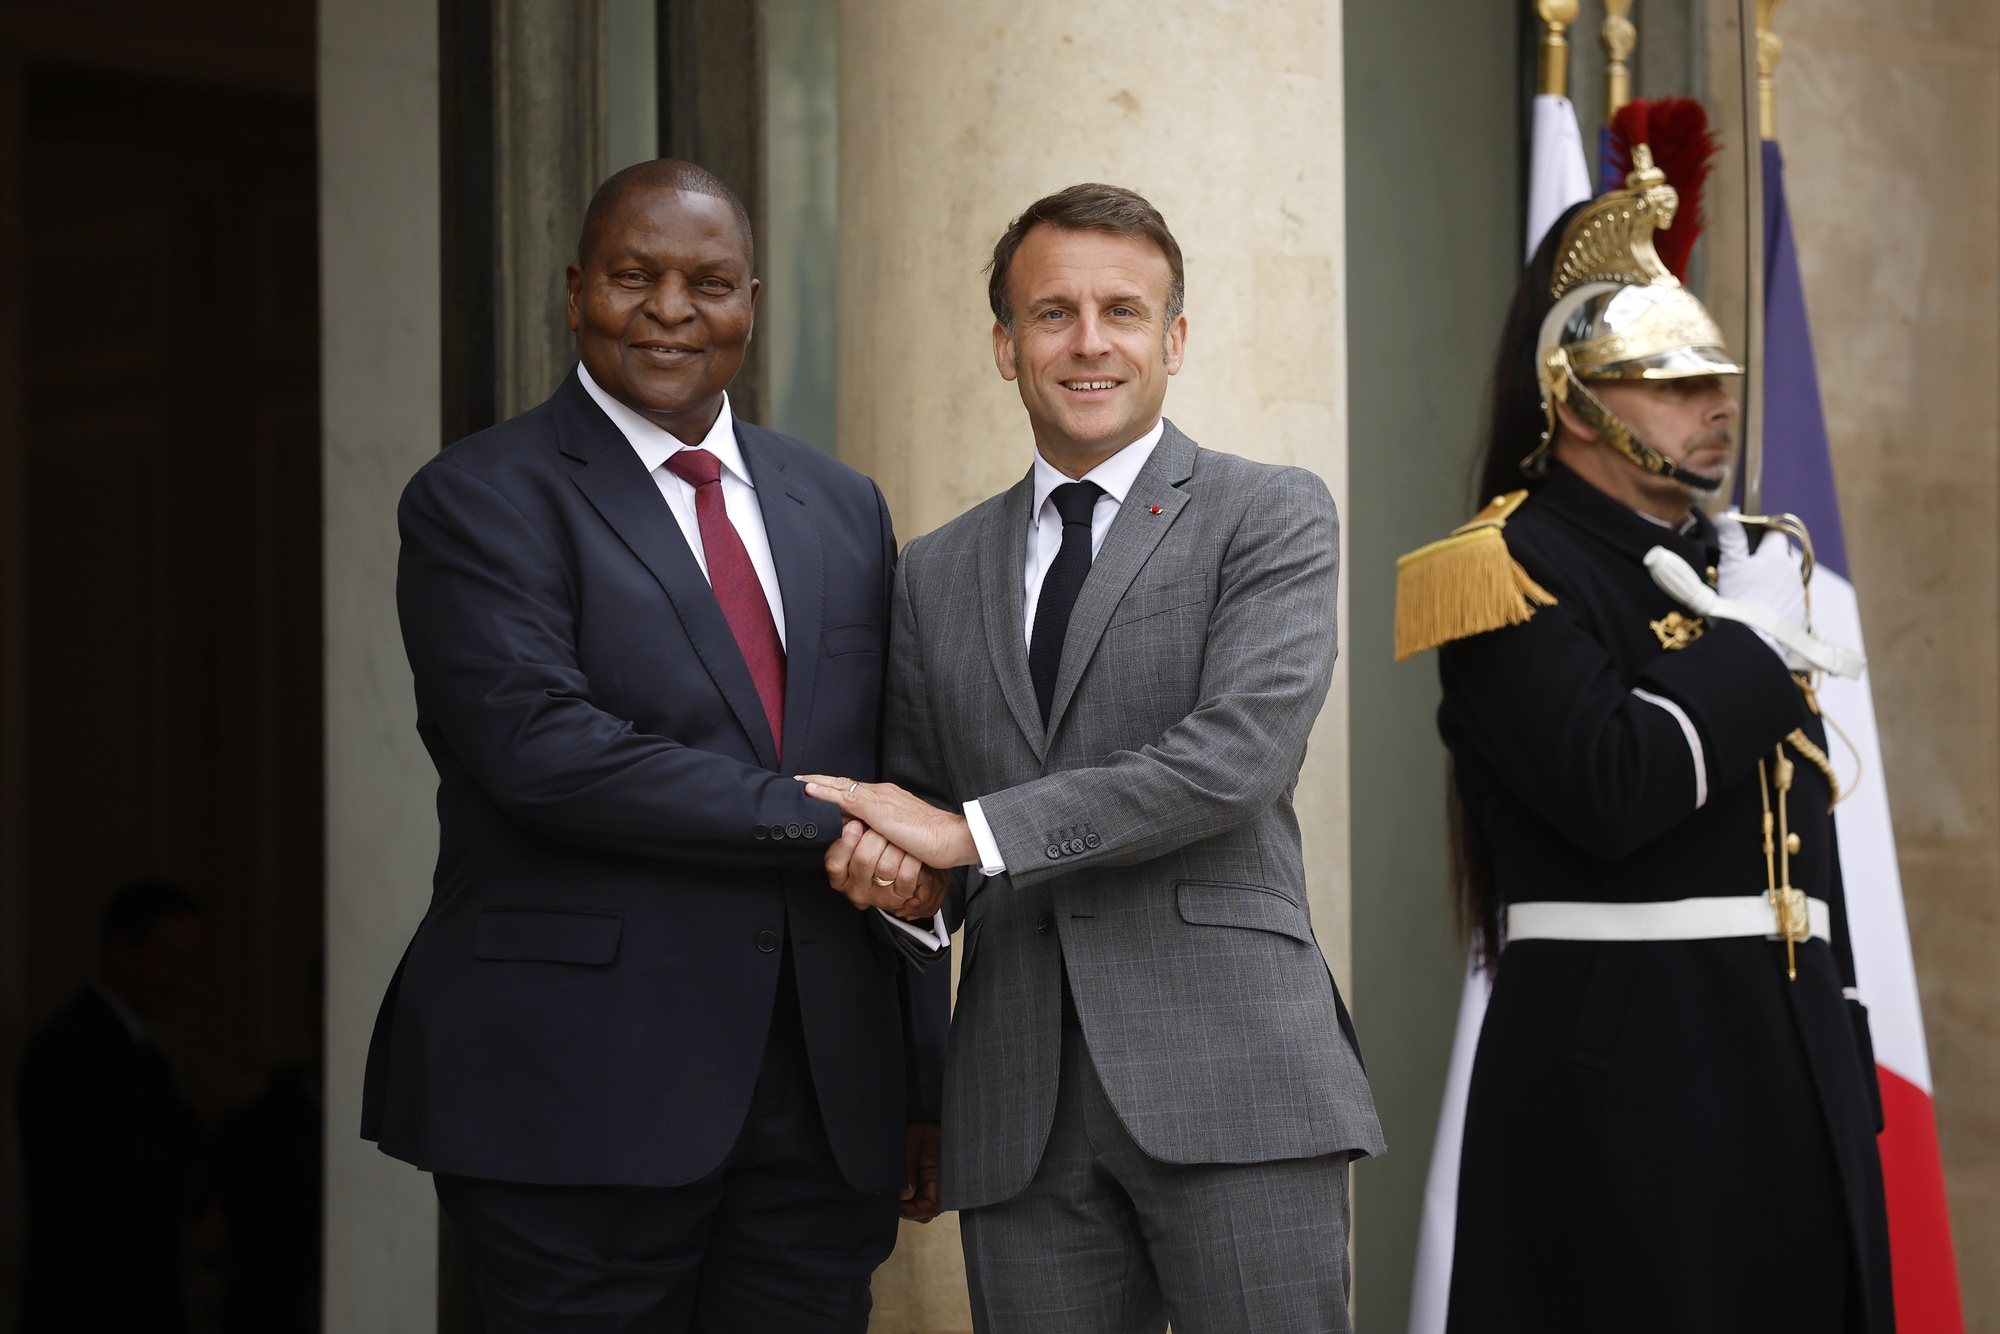 epa11284037 French President Emmanuel Macron (C) welcomes Central African Republic (CAR) President Faustin-Archange Touadera (L) upon his arrival before a working lunch at the Elysee Palace in Paris, France, 17 April 2024. Macron received Central African President Touadera at the Elysee to discuss the situation in the Central African Republic, in the region as well as different aspects of their bilateral relations, according to an Elysee press release.  EPA/YOAN VALAT